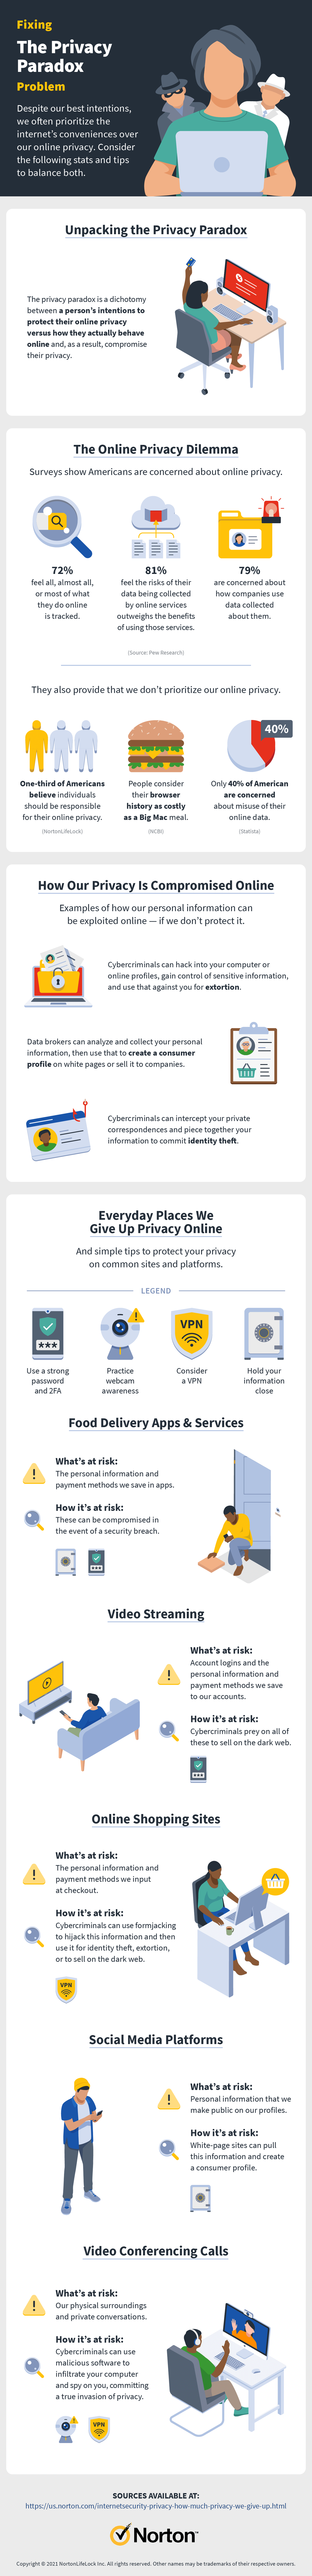 an infographic that’s an overview of the privacy paradox, including what it means and places we sacrifice our online privacy out of convenience, plus tips to protect our online privacy